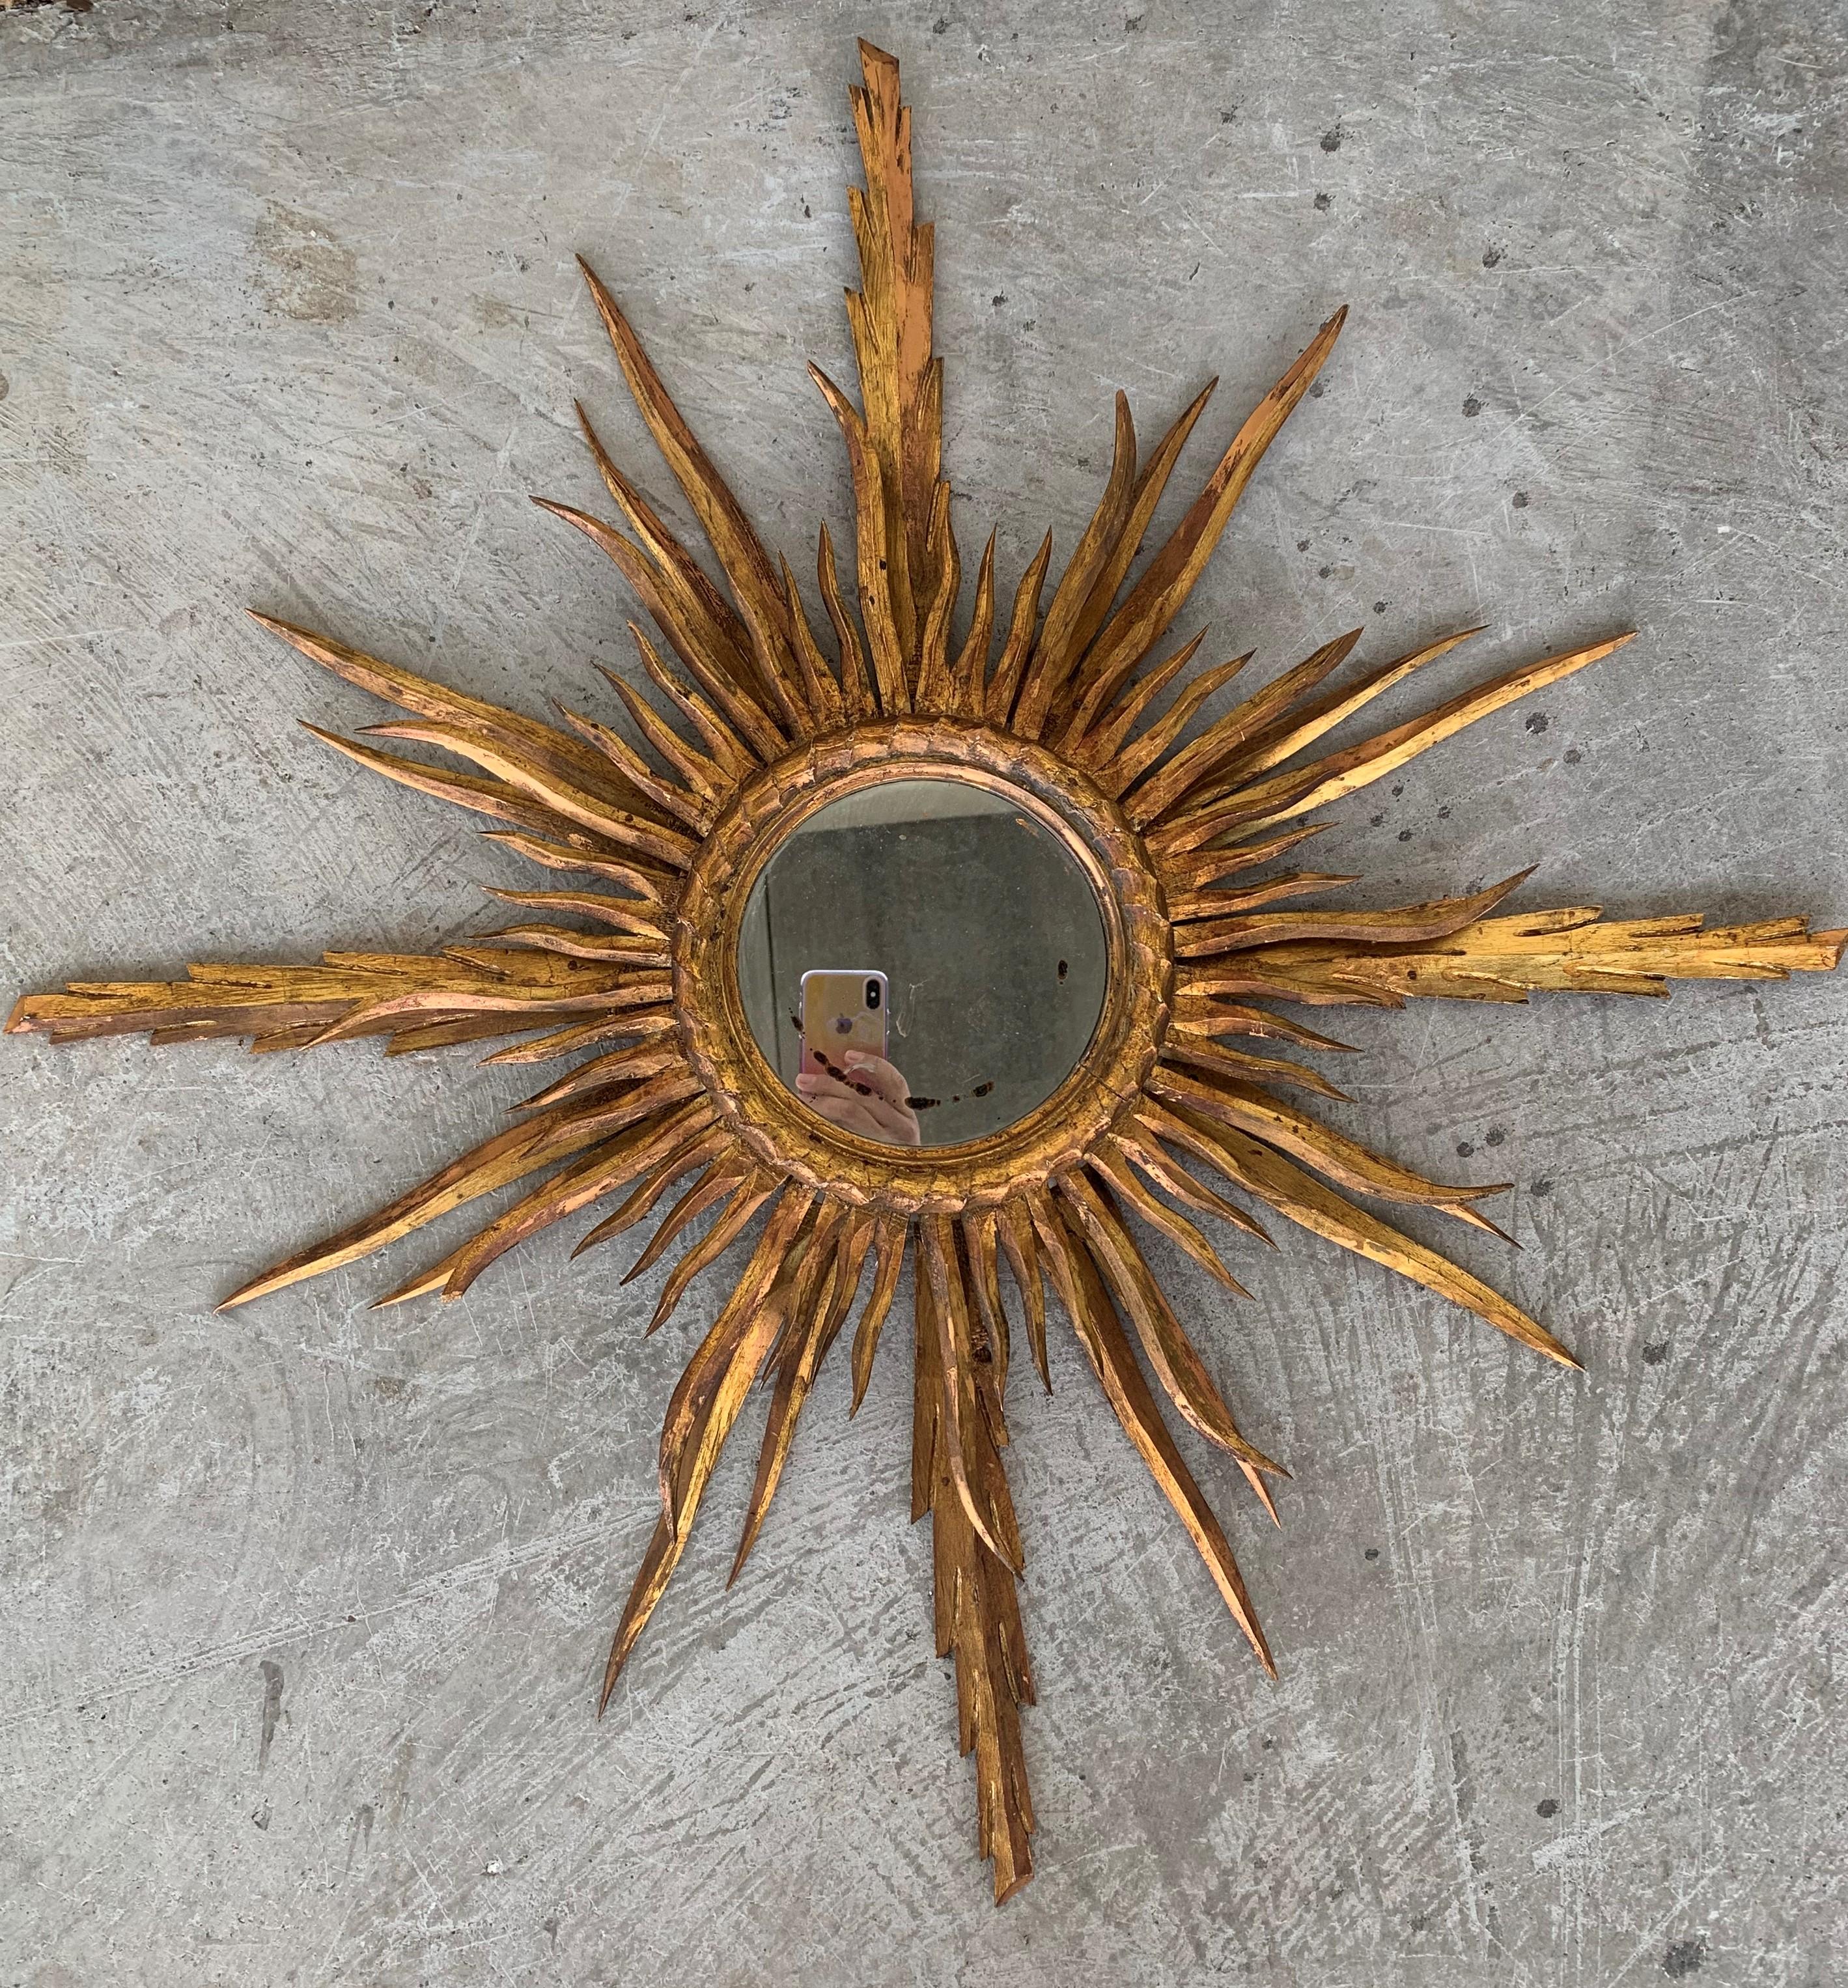 A very beautiful small sunburst mirror finely carved with 24-karat gold leaf finish. Very unusual size and interesting patina, Spain, 1930s.
Measures: Glass diameter 6.5cm / overall dimensions 30 in diameter.

